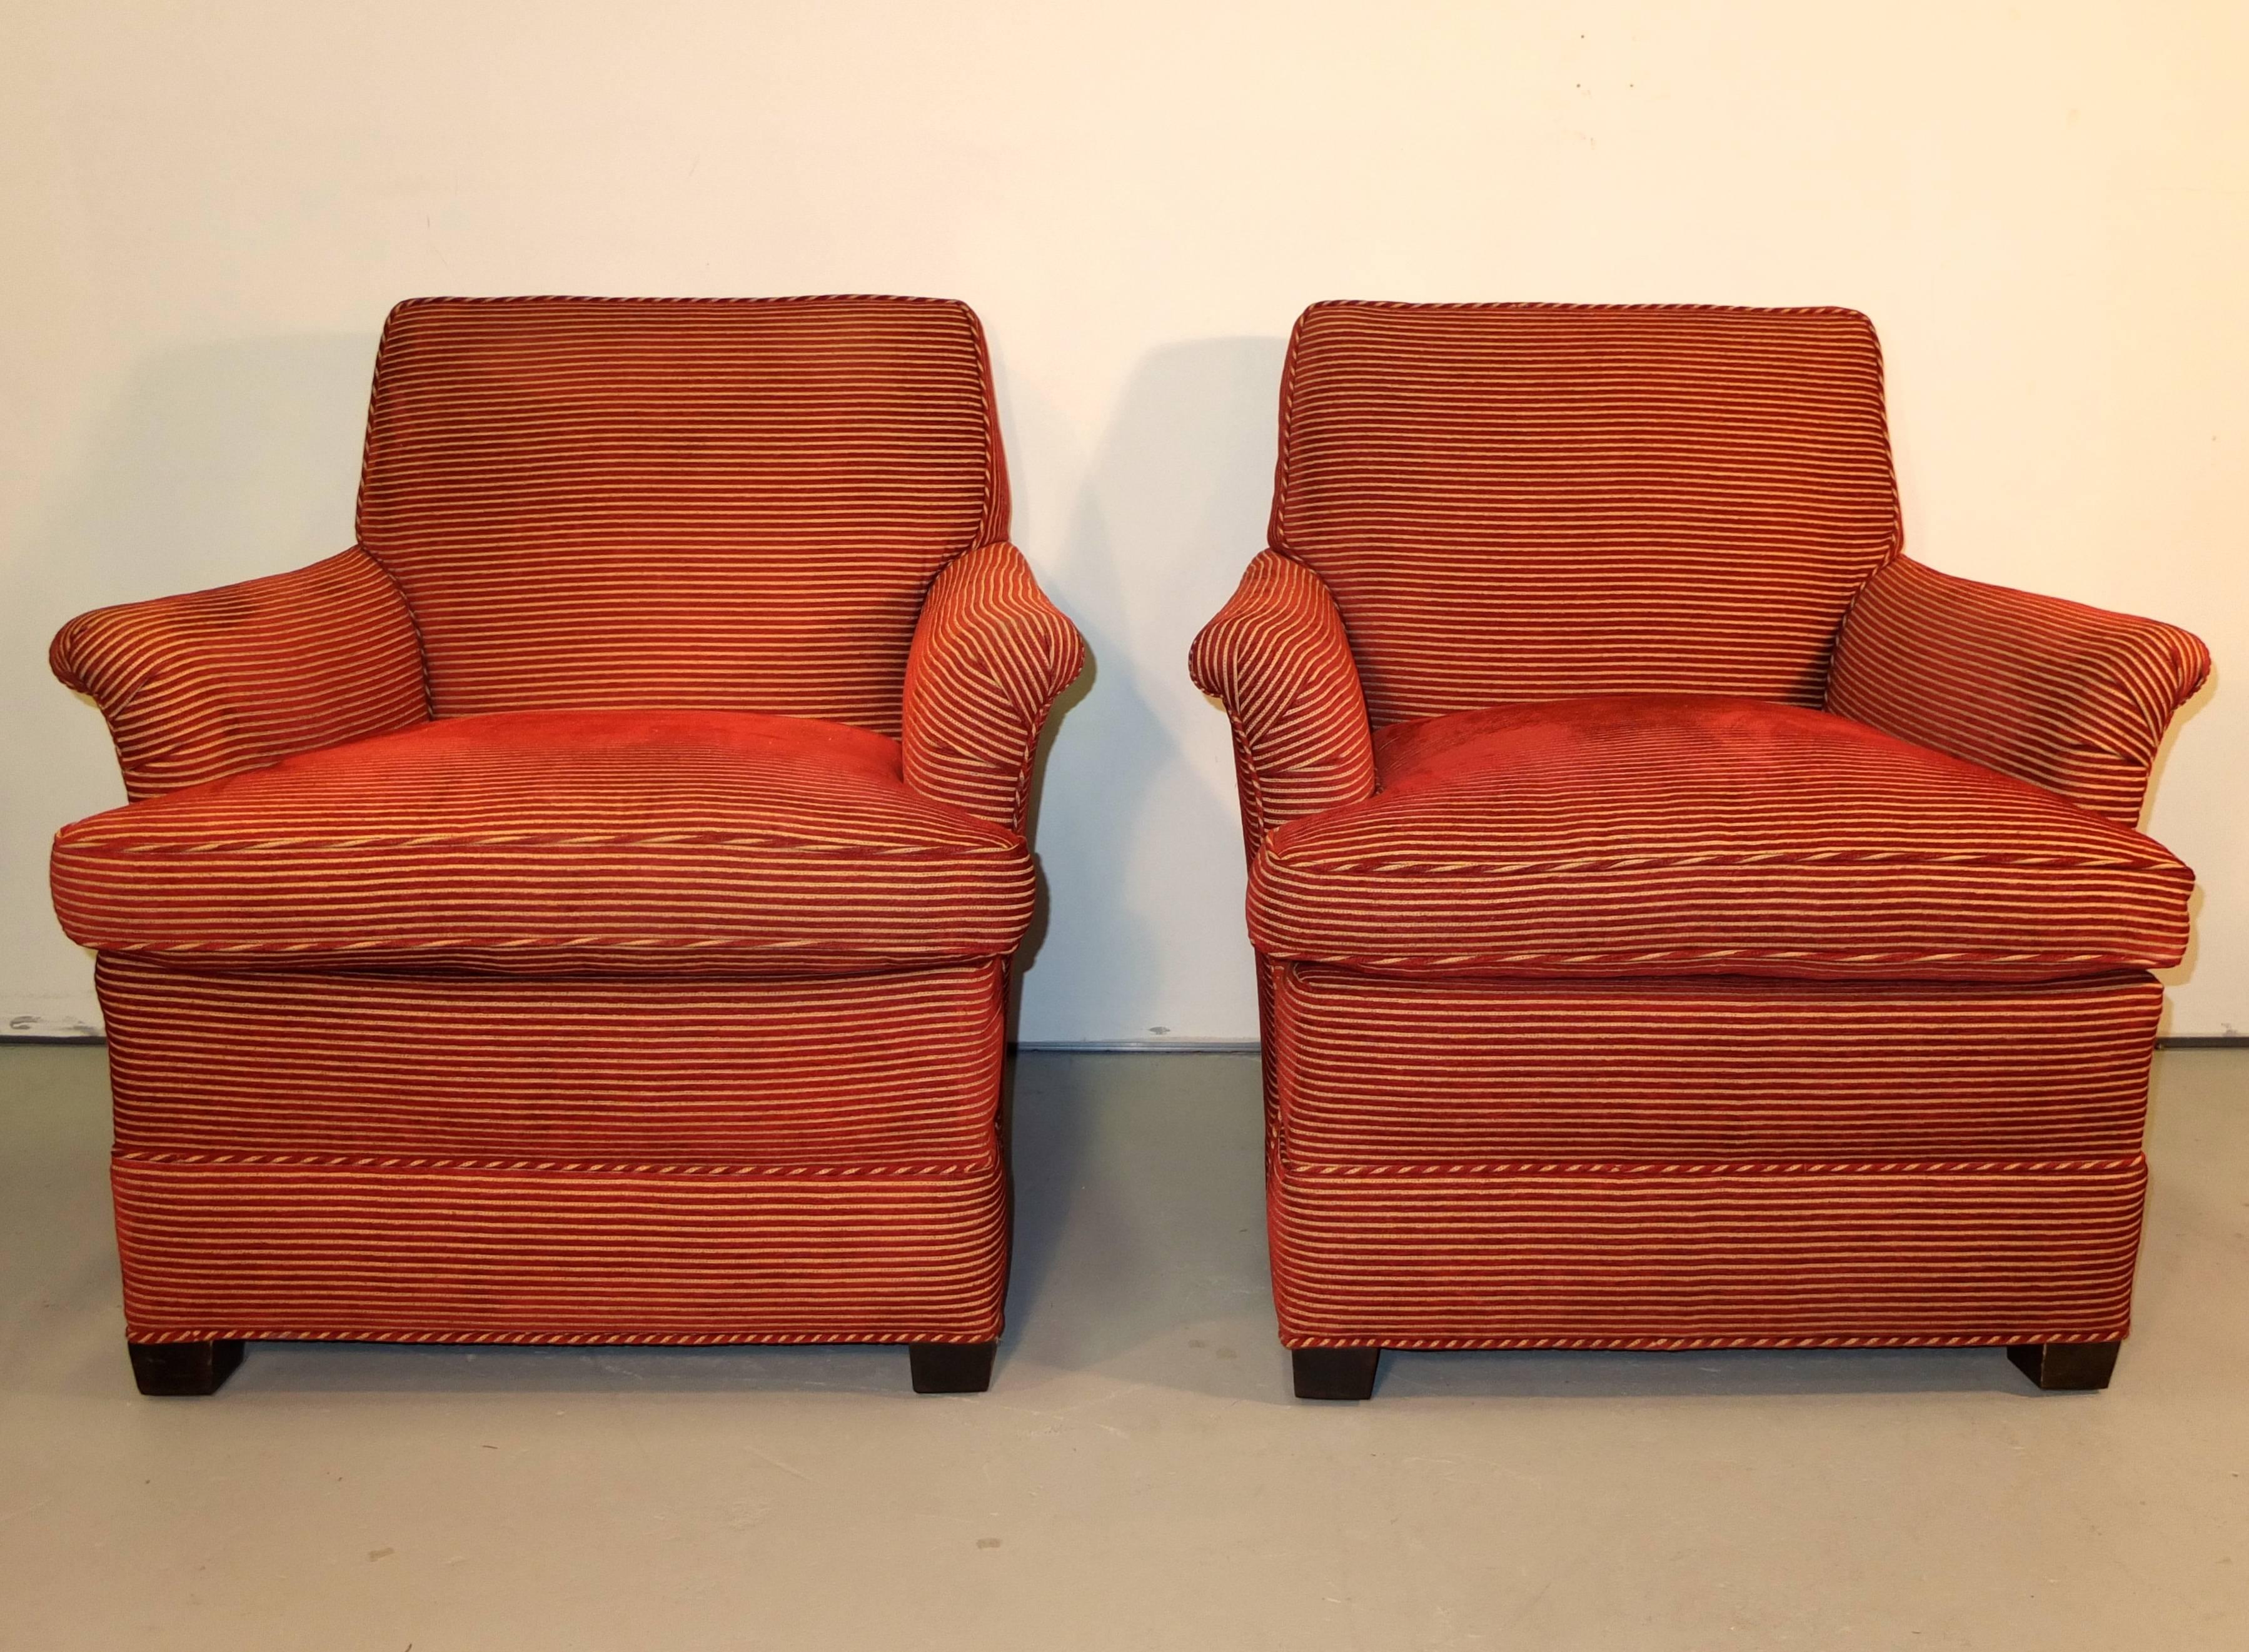 American Classical Pair of Upholstered Lounge Chairs